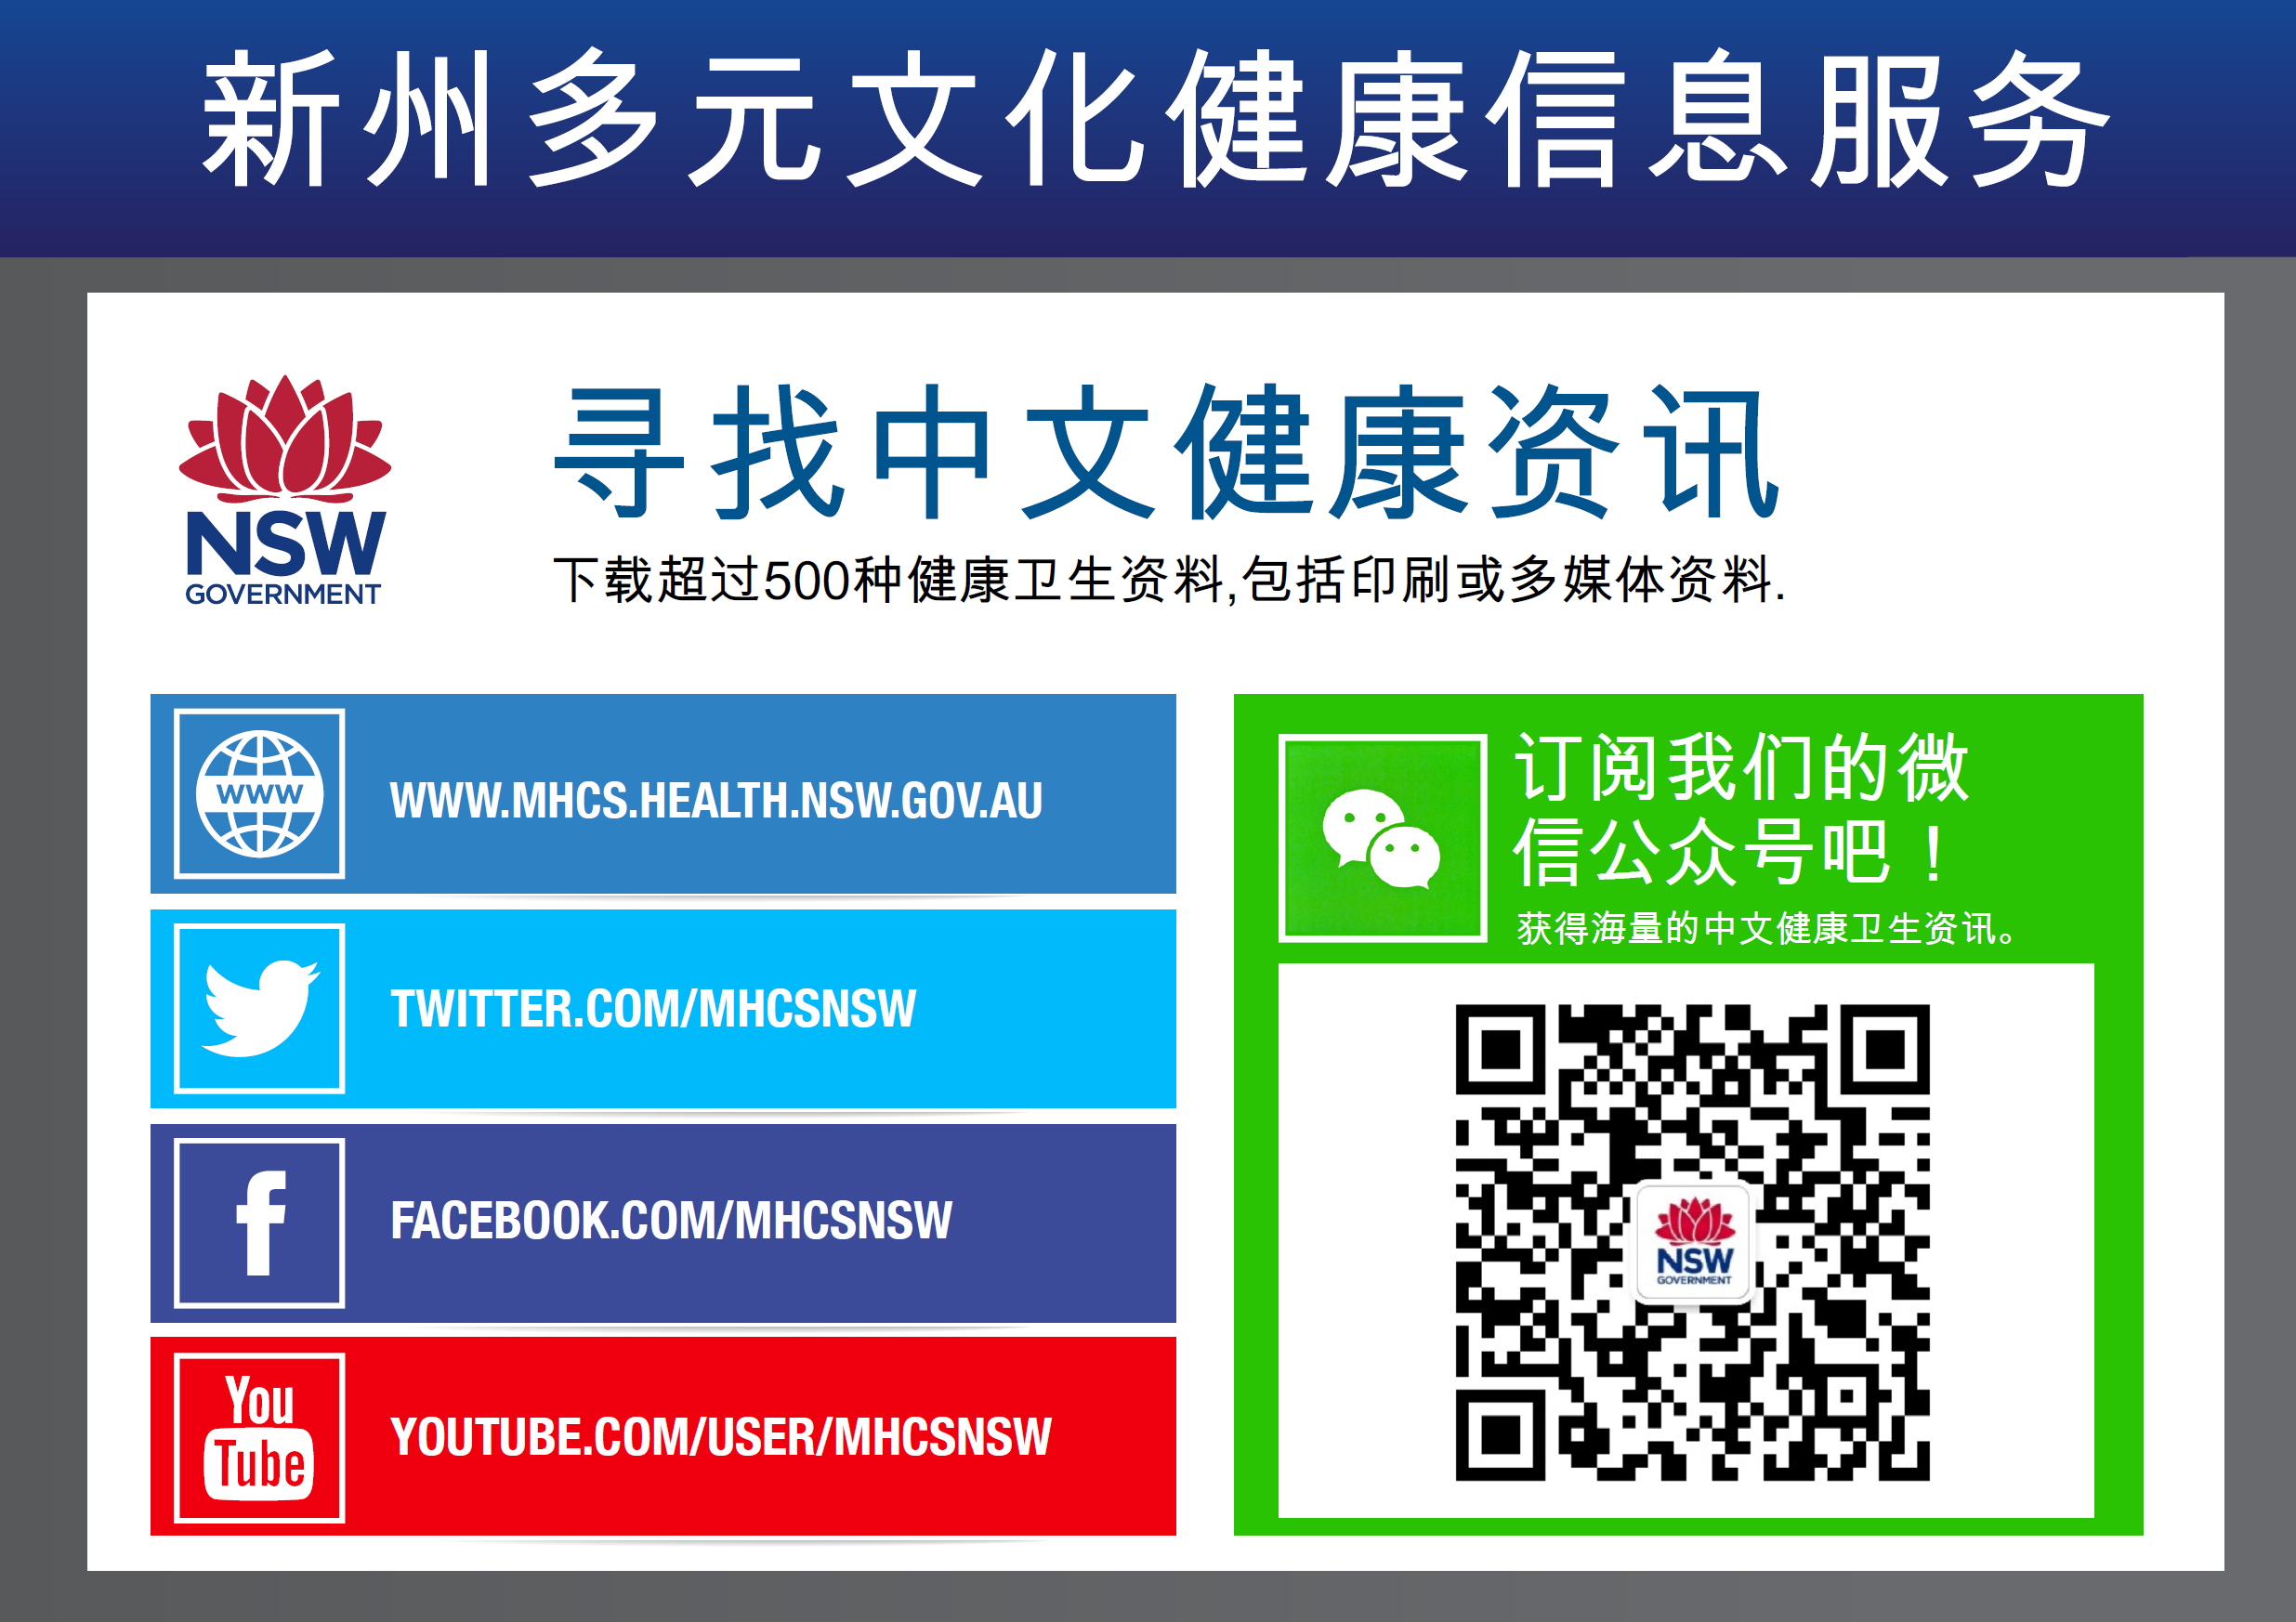 NSW Health launched new service on Wechat